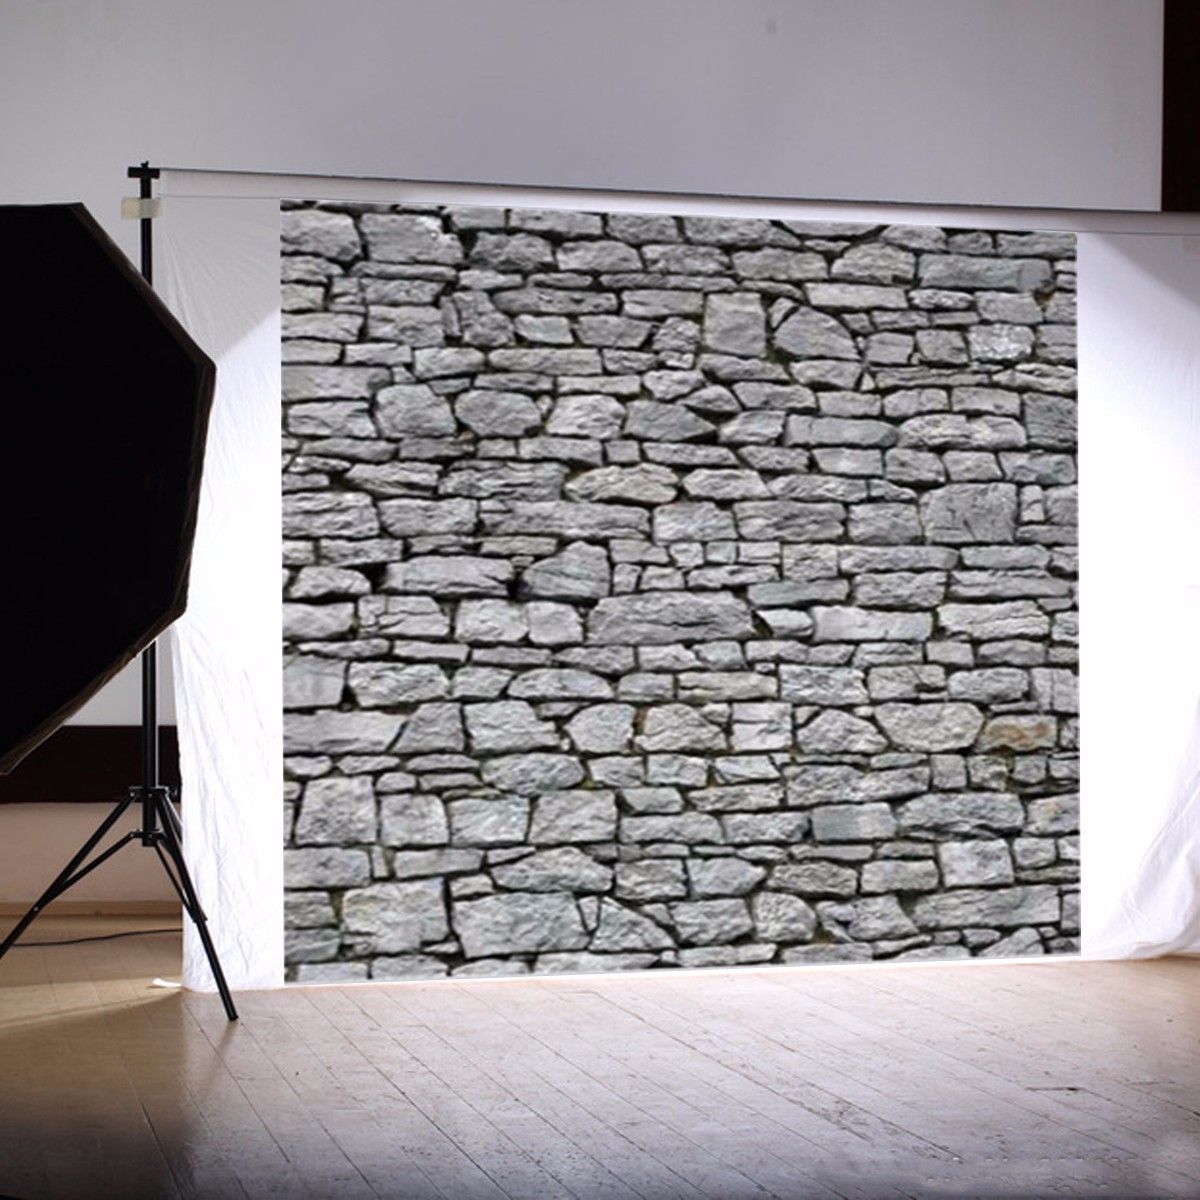 8x8ft-Light-Gray-Stone-Wall-Photography-Backdrop-Studio-Prop-Background-1167053